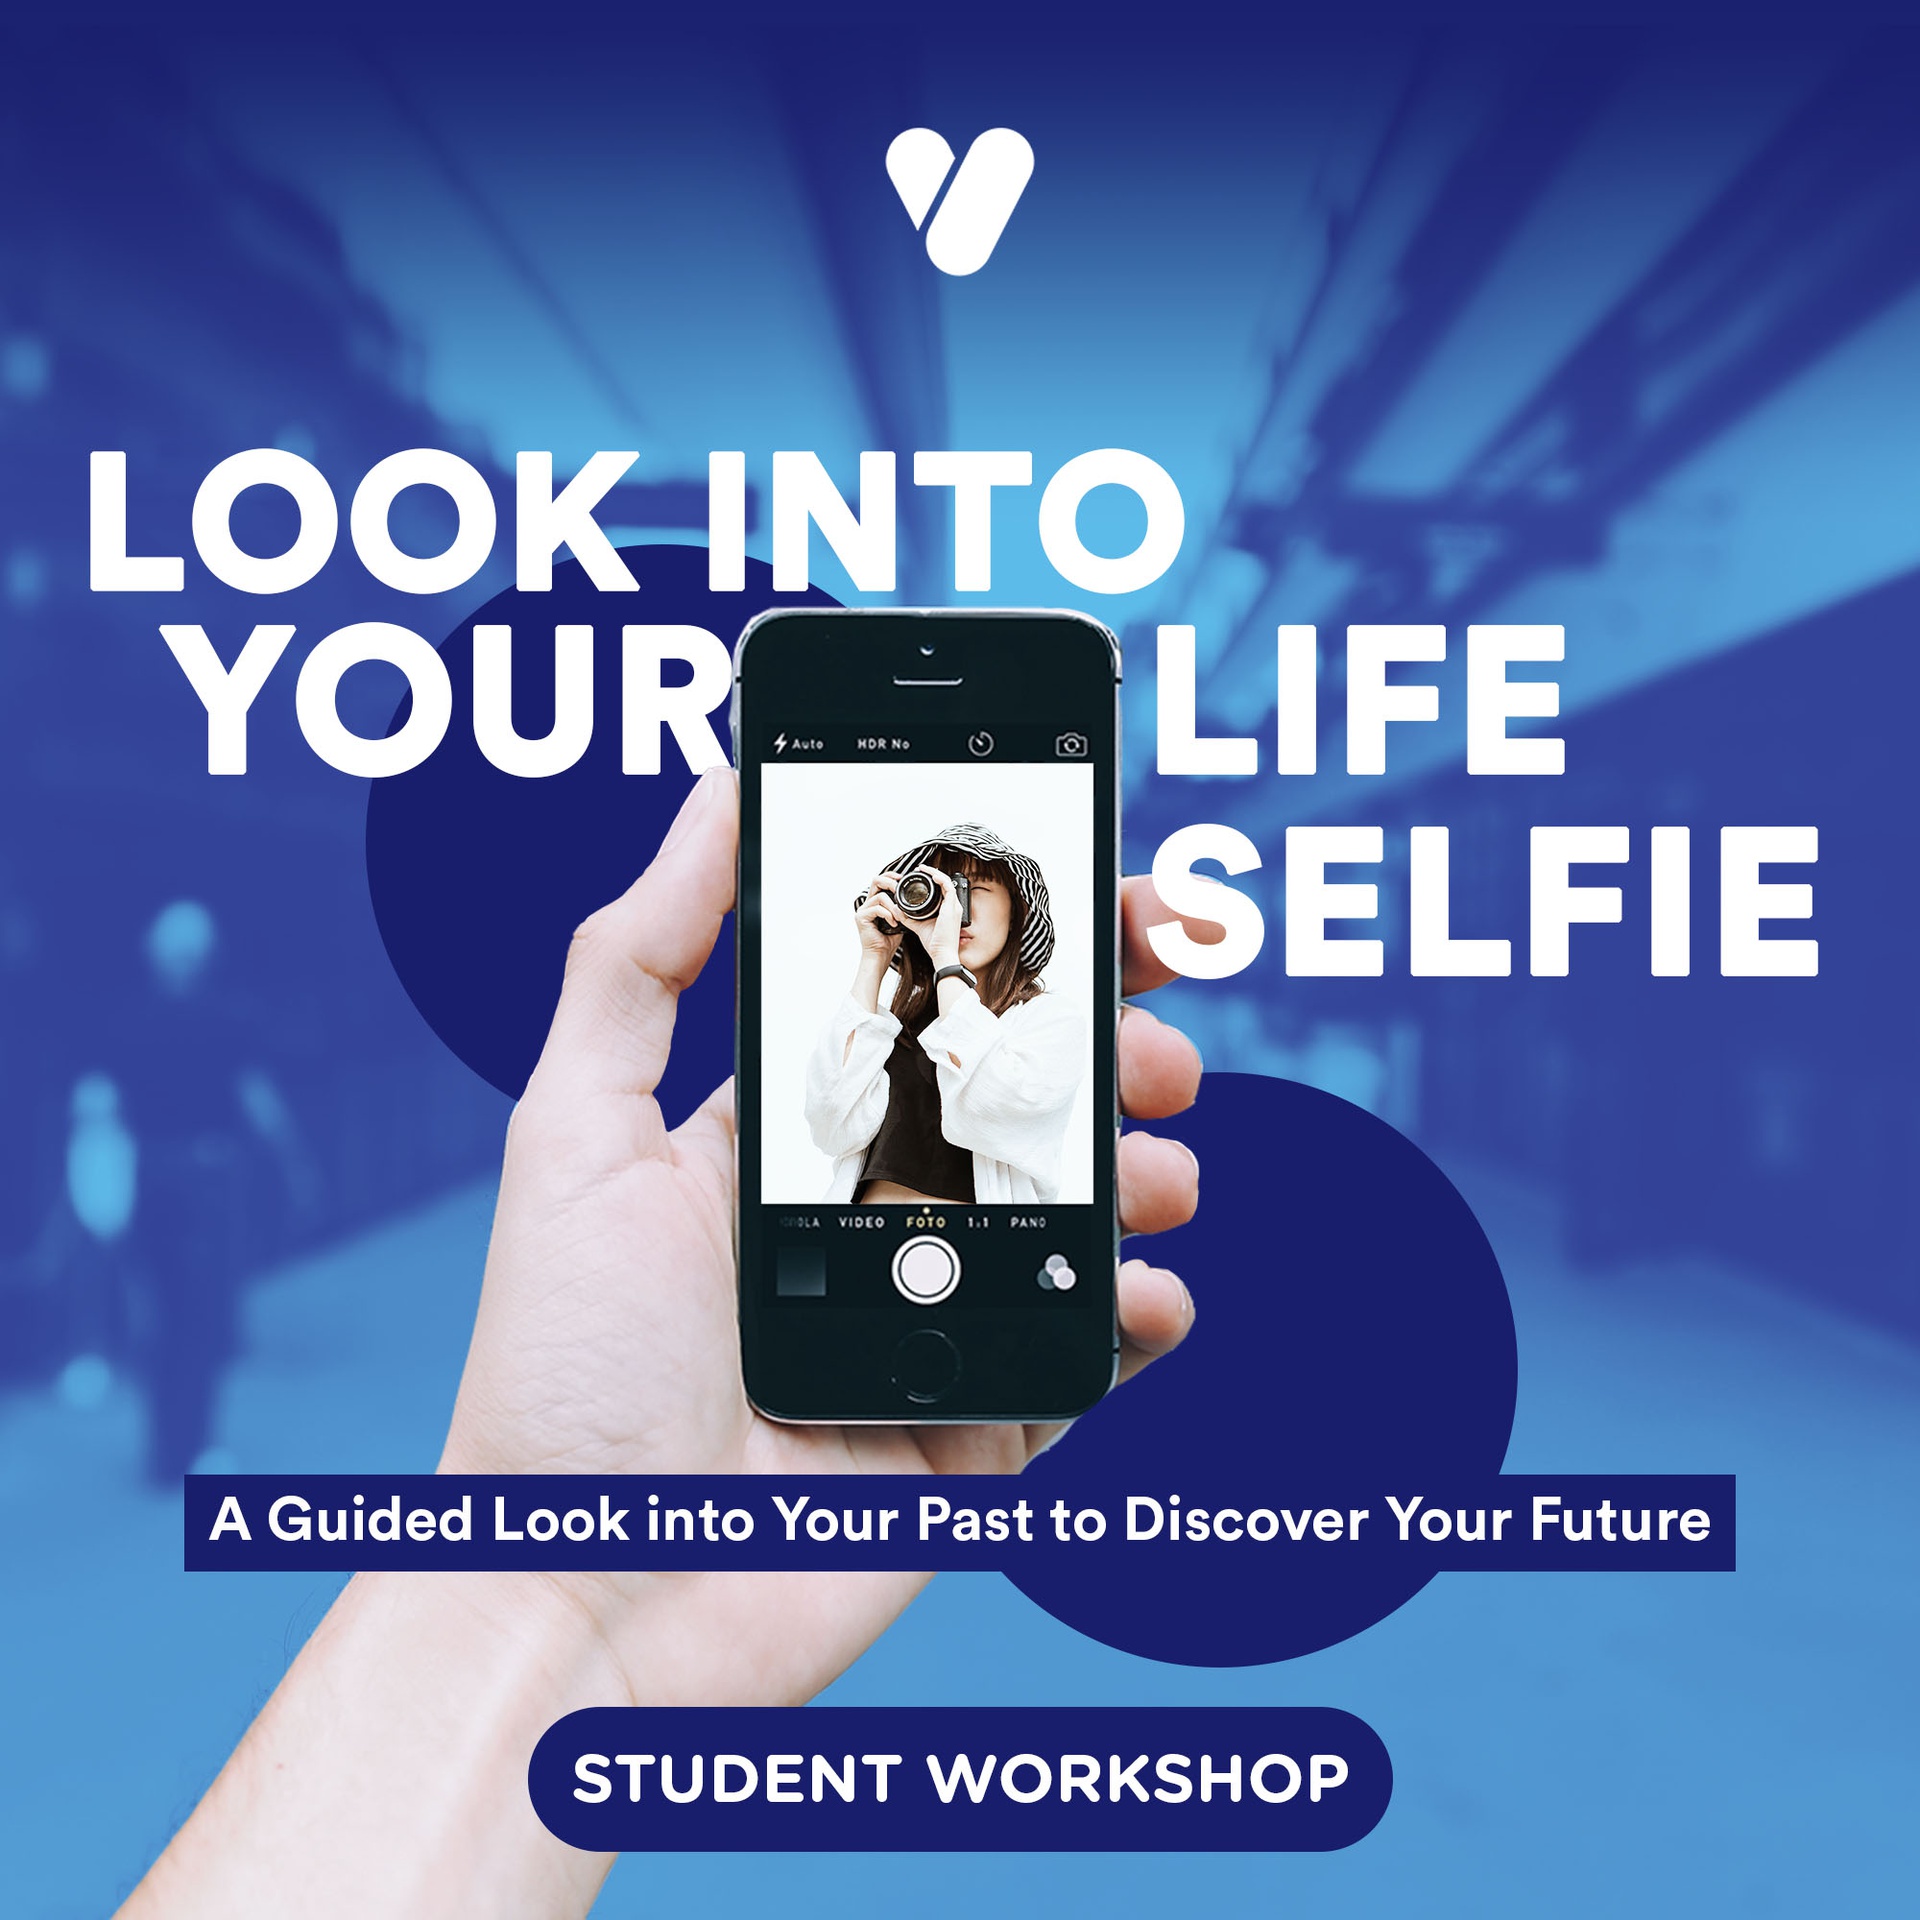 Look into Your Life Selfie: A Guided Look into Your Past to Discover Your Future